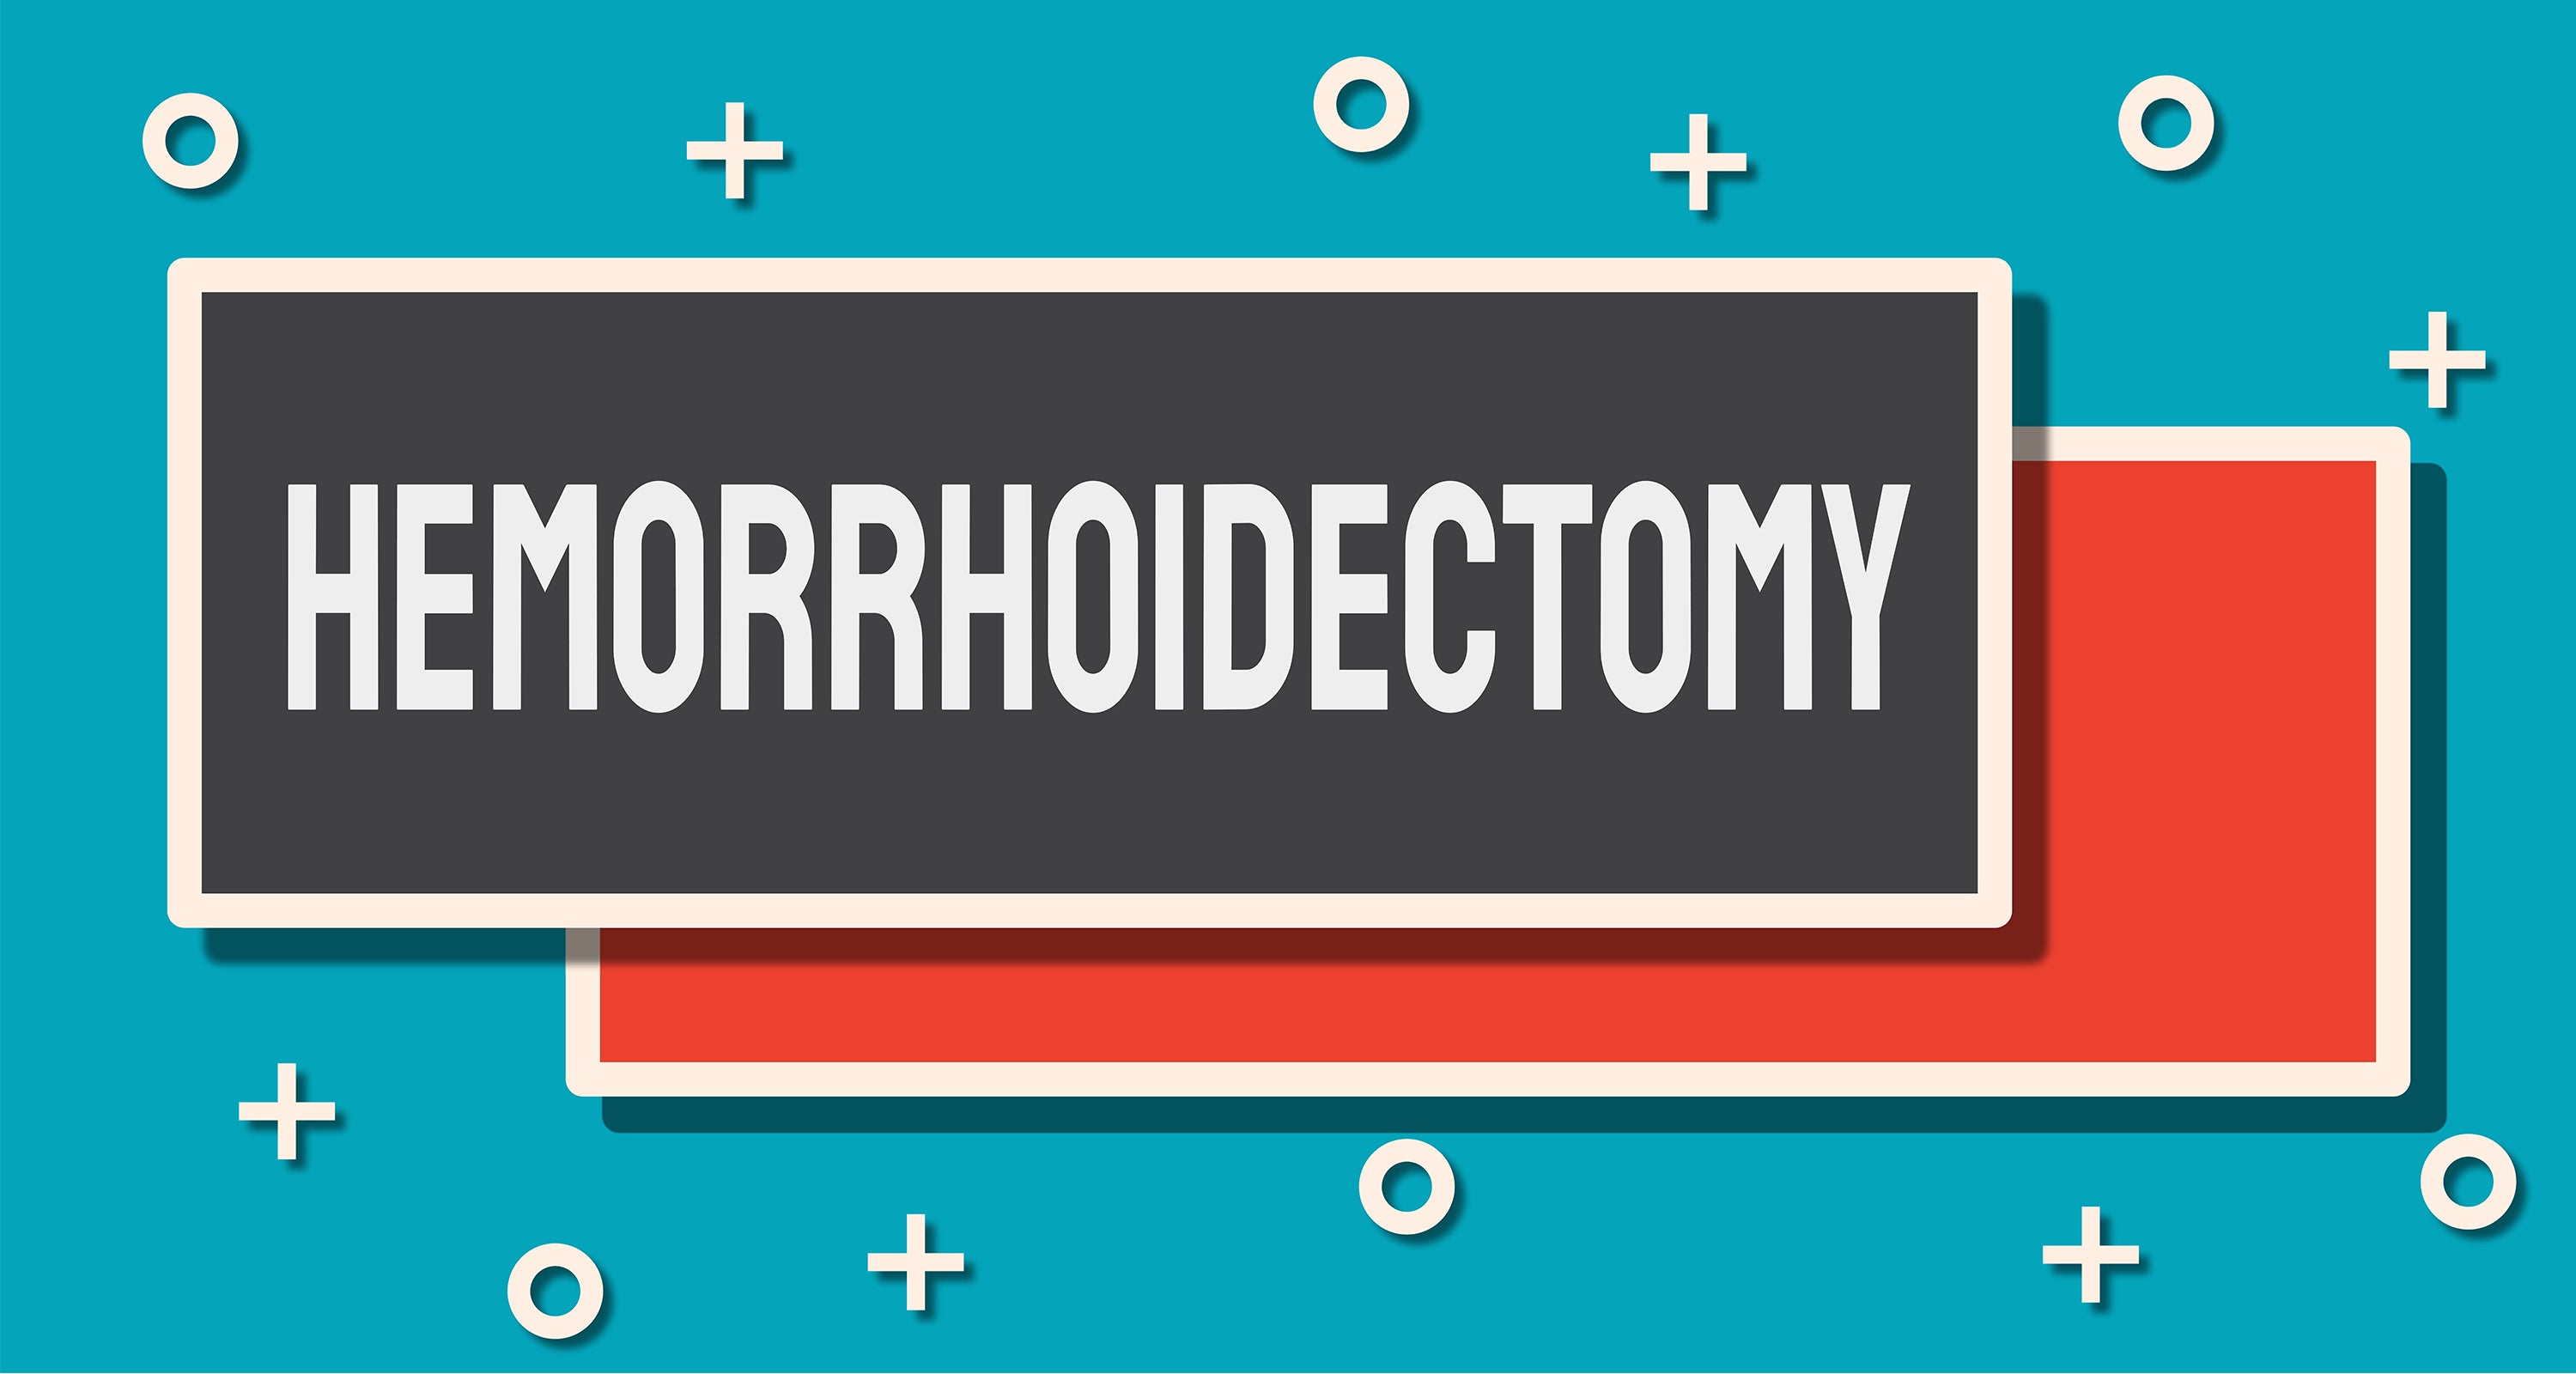 A hemorrhoidectomy is a procedure for removing hemorrhoids inside the body